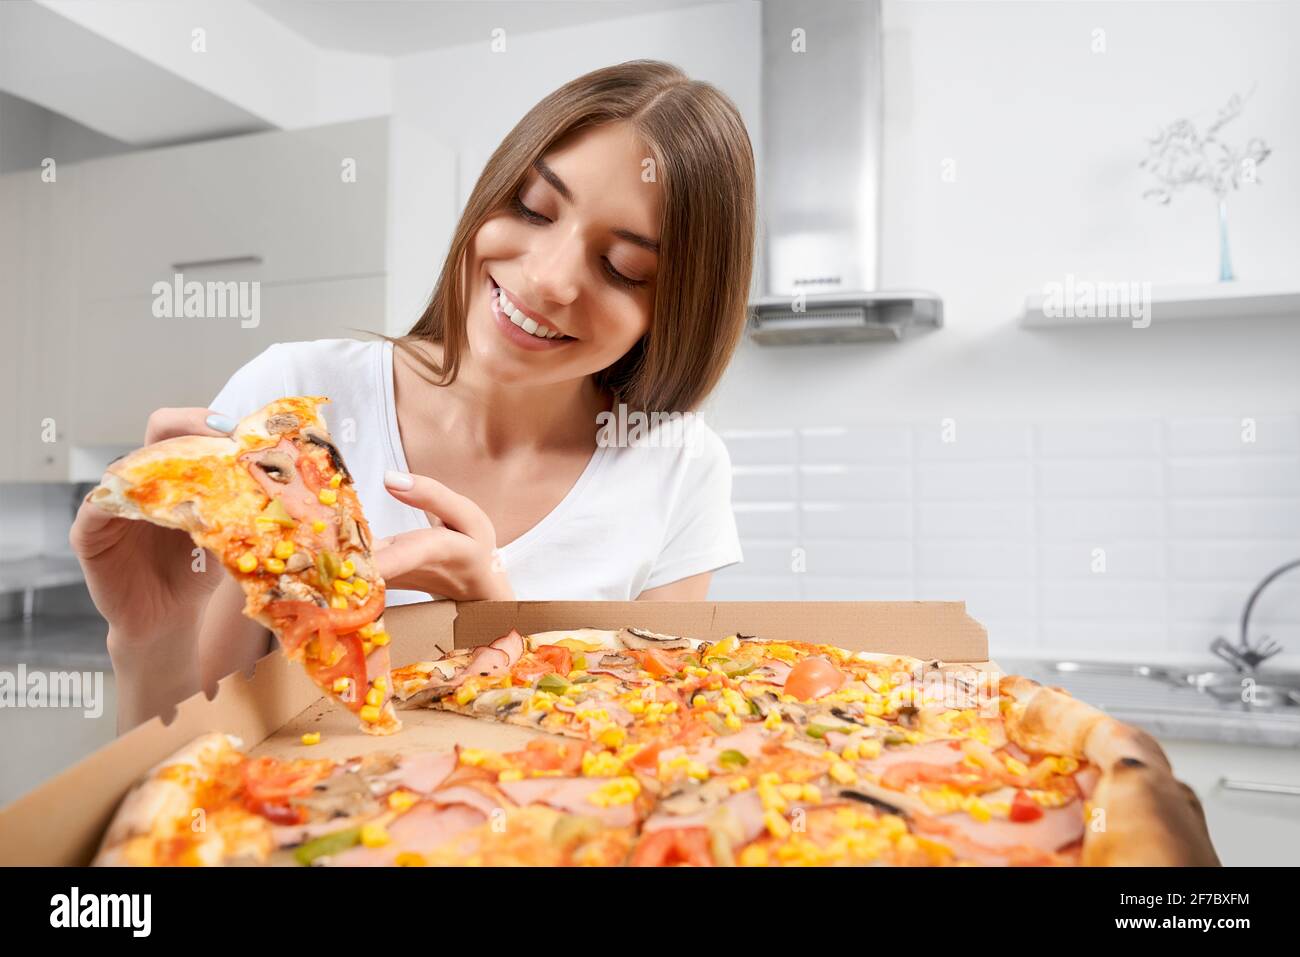 Close up of smiling woman holding big pizza and eating piece at home. Concept of eating tasty food at home. Stock Photo